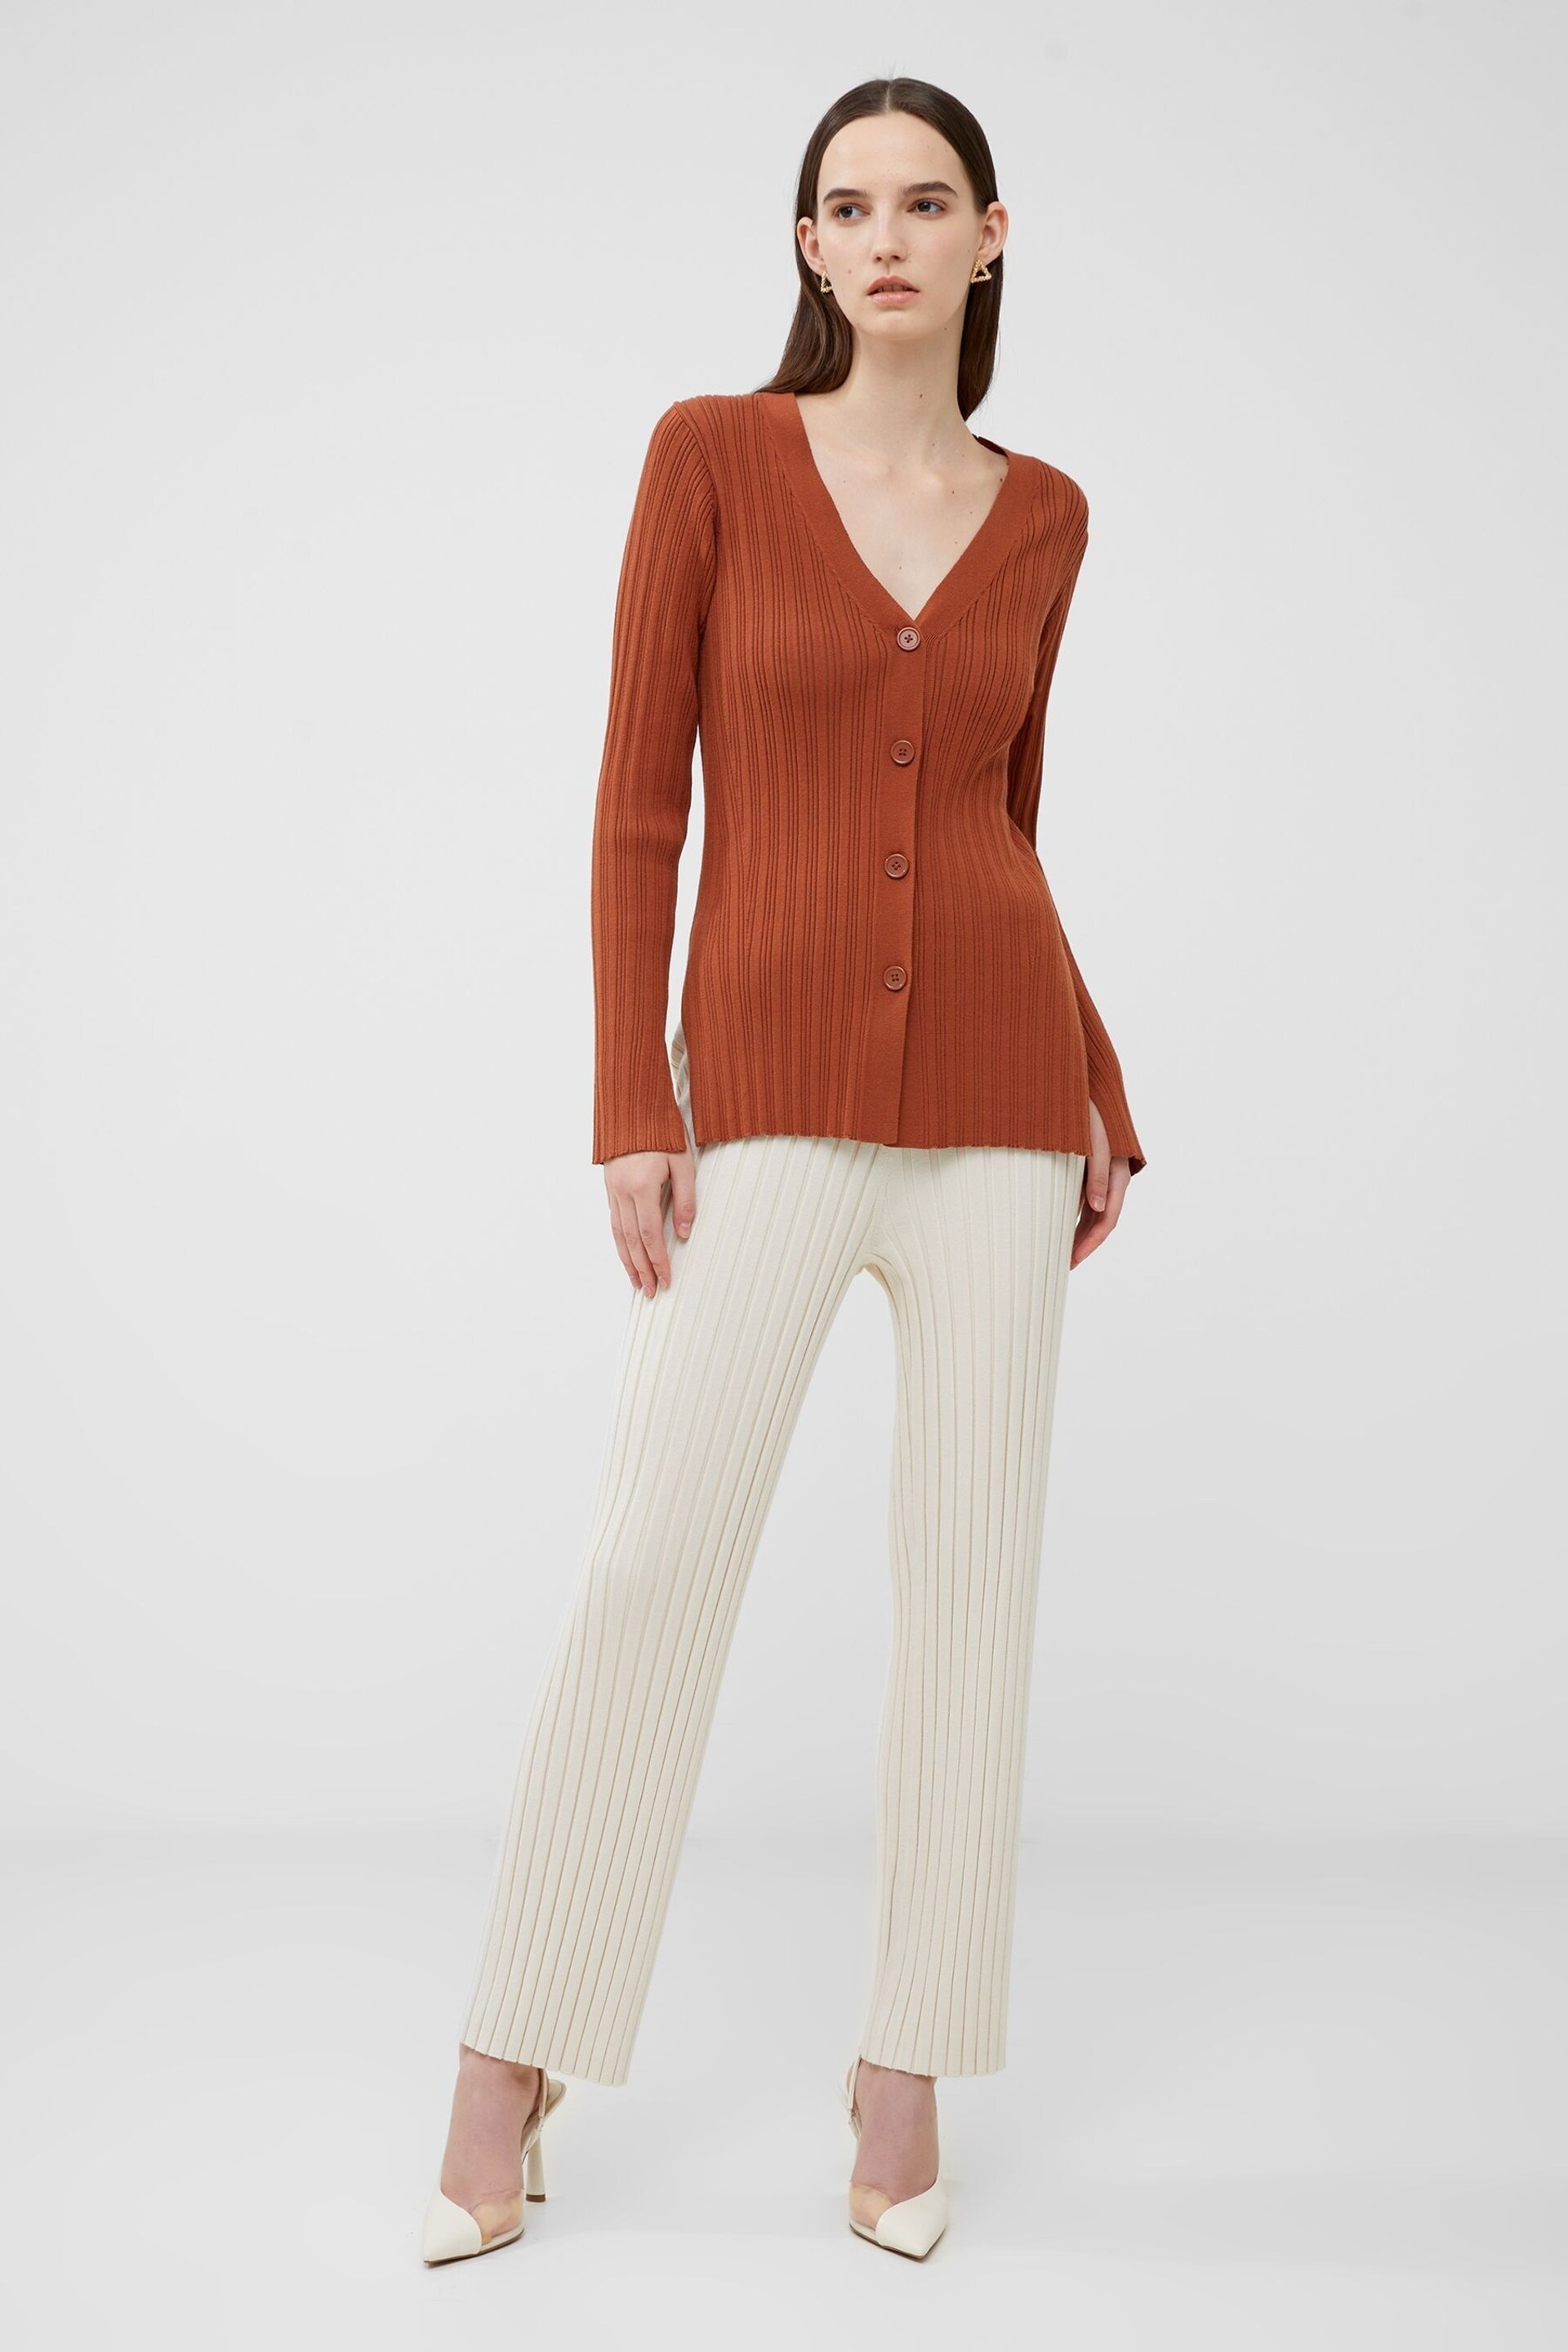 French Connection Leonora Cardigan - Image 1 of 4